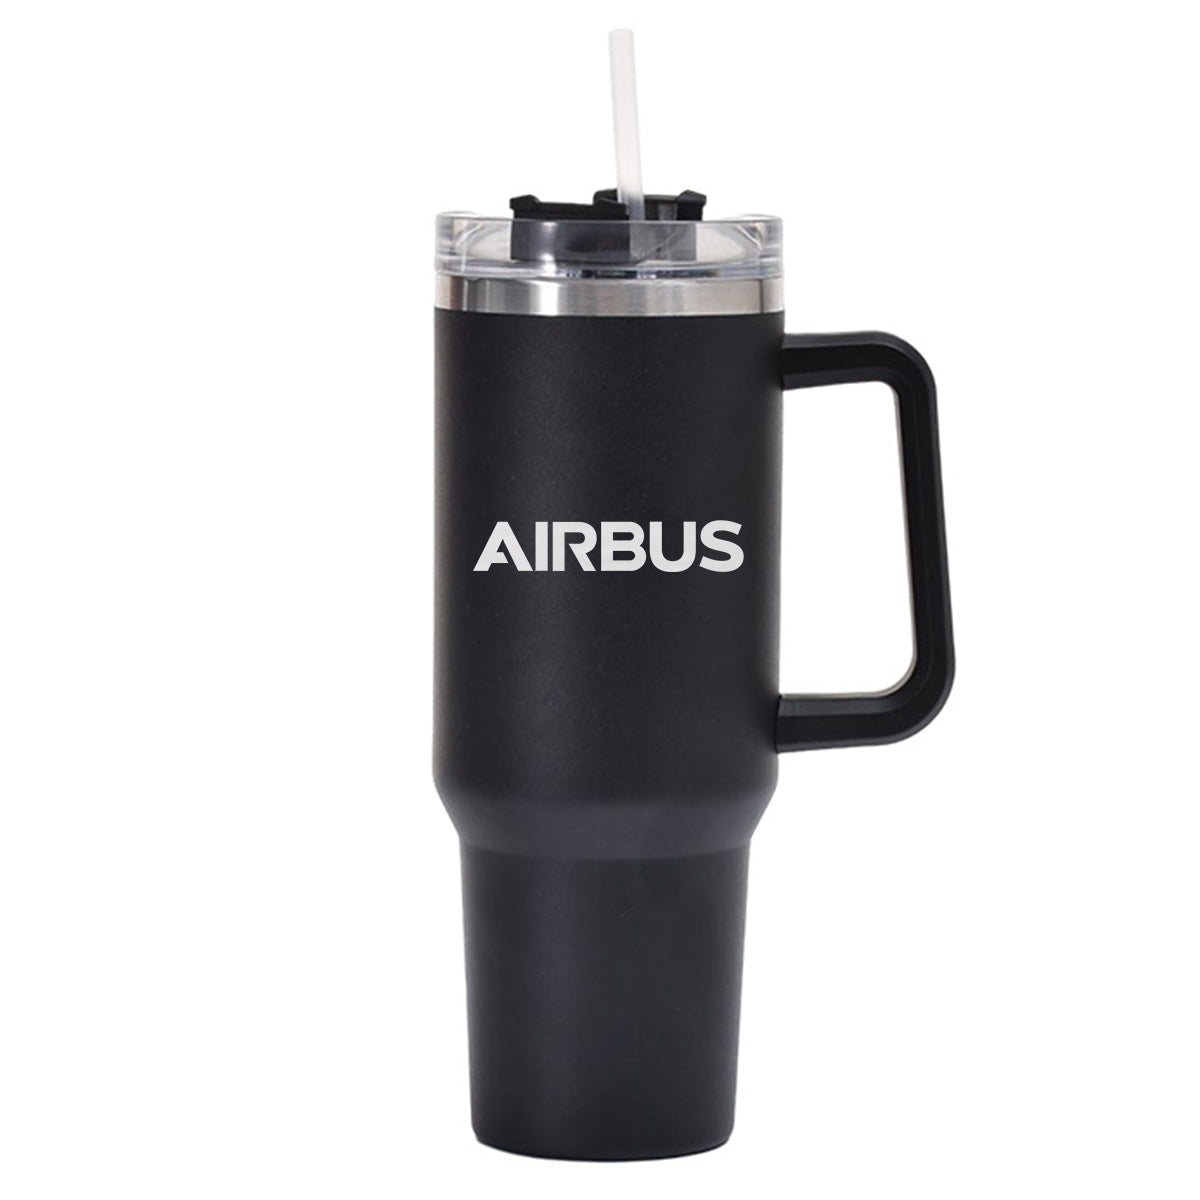 Airbus & Text Designed 40oz Stainless Steel Car Mug With Holder